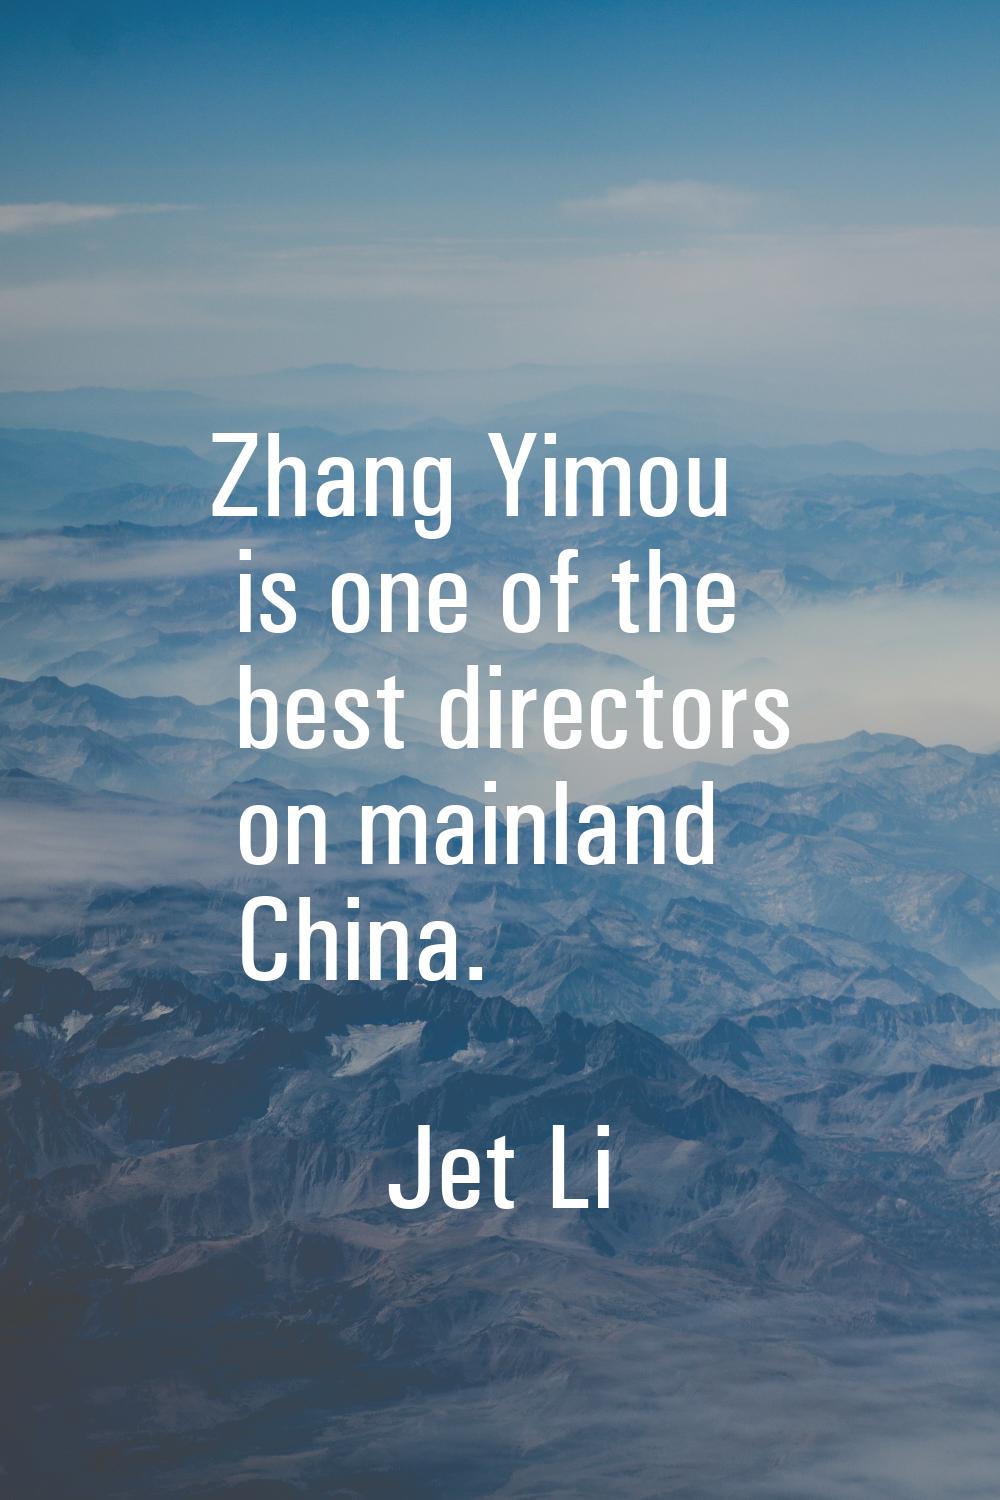 Zhang Yimou is one of the best directors on mainland China.